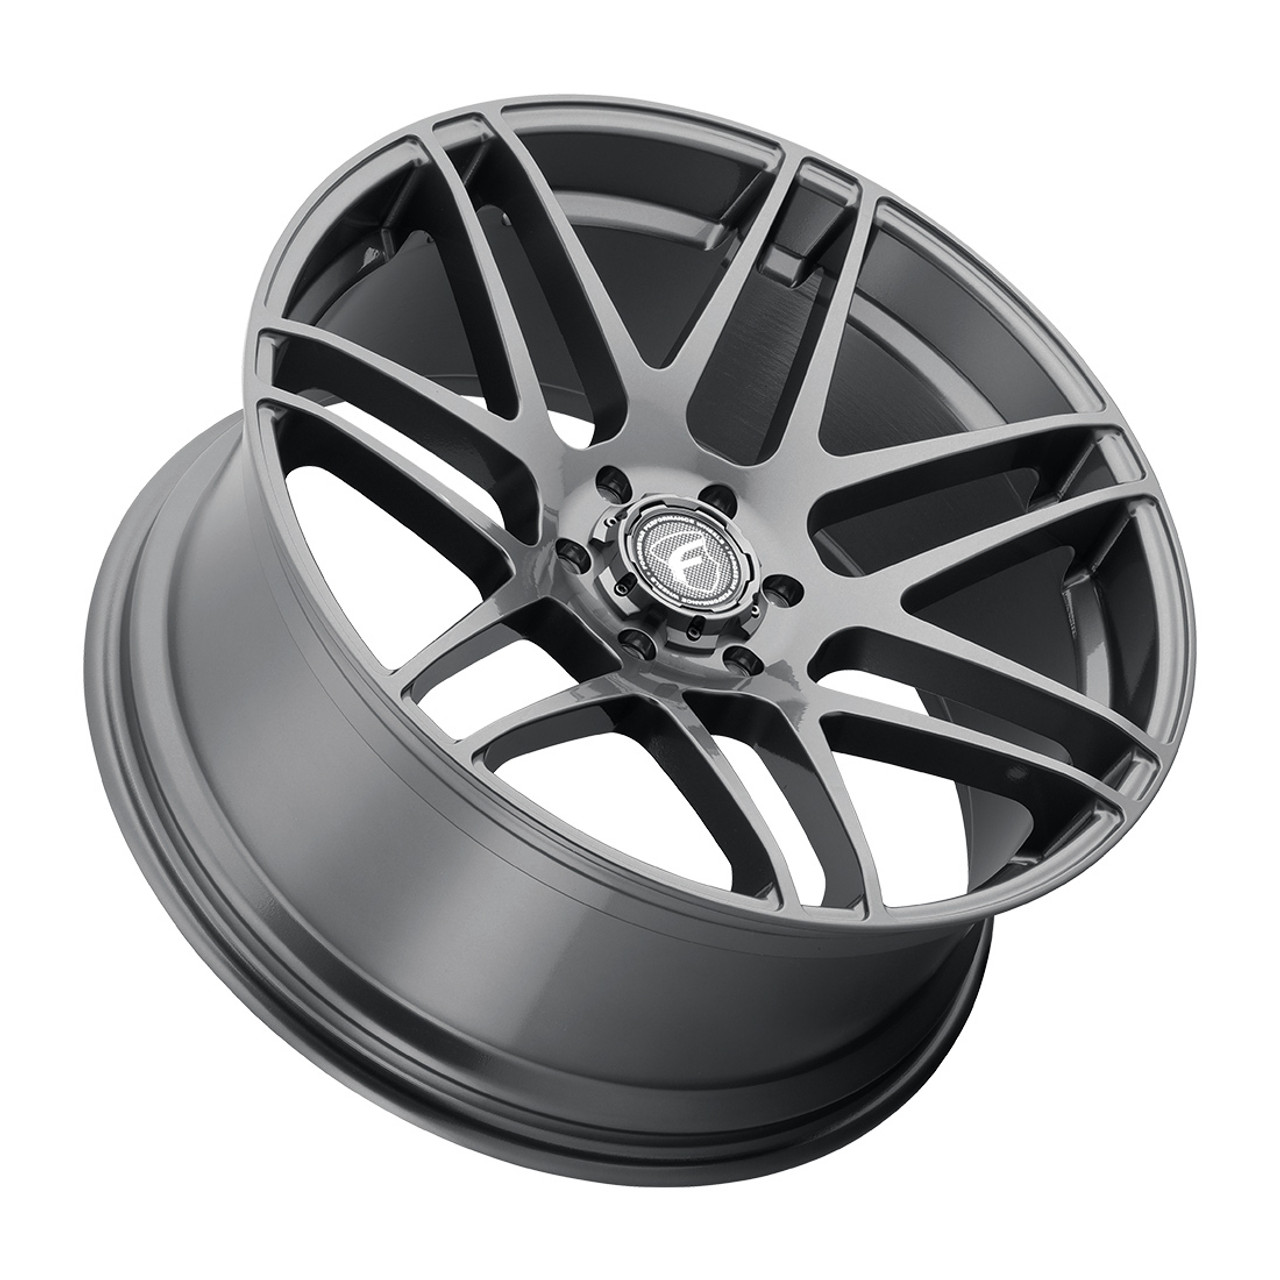 Forgestar X14 Wheel - 22x10 / 6x139.7 / +30 Offset / Super Deep Concave - Gloss Anthracite